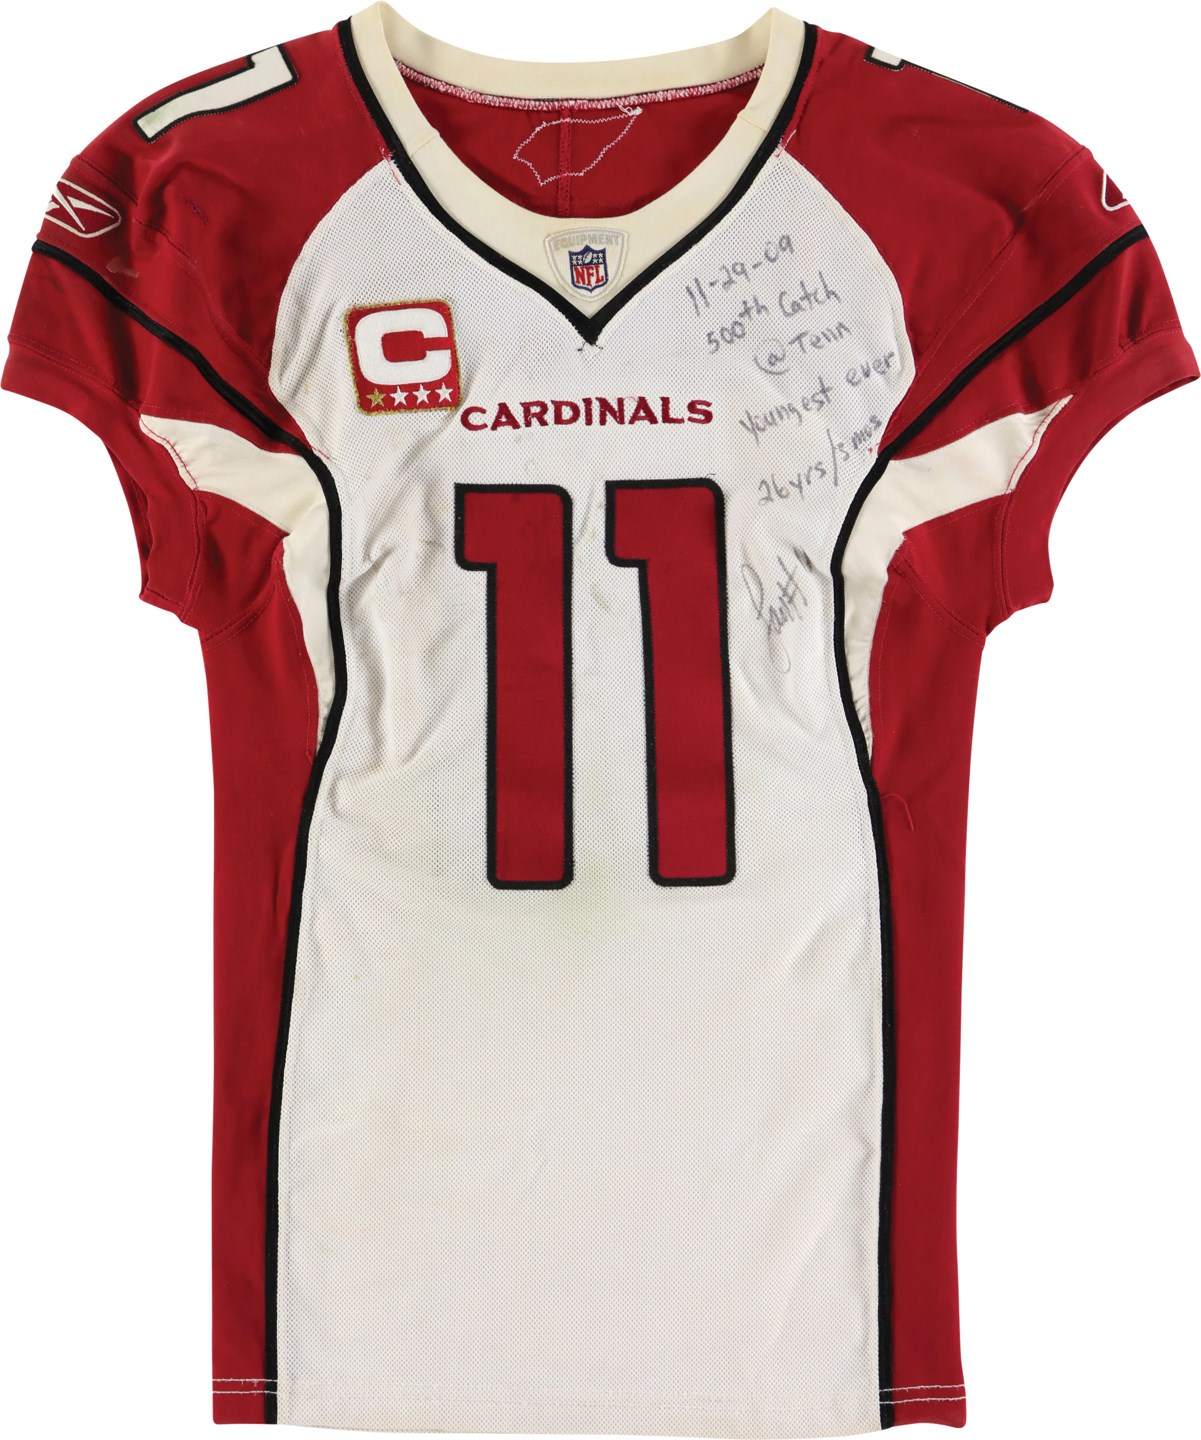 - Historic 2009 Larry Fitzgerald Youngest to 500 Catches Arizona Cardinals Signed Game Worn Uniform (Photo-Matched to Every Home Game!) (PSA)